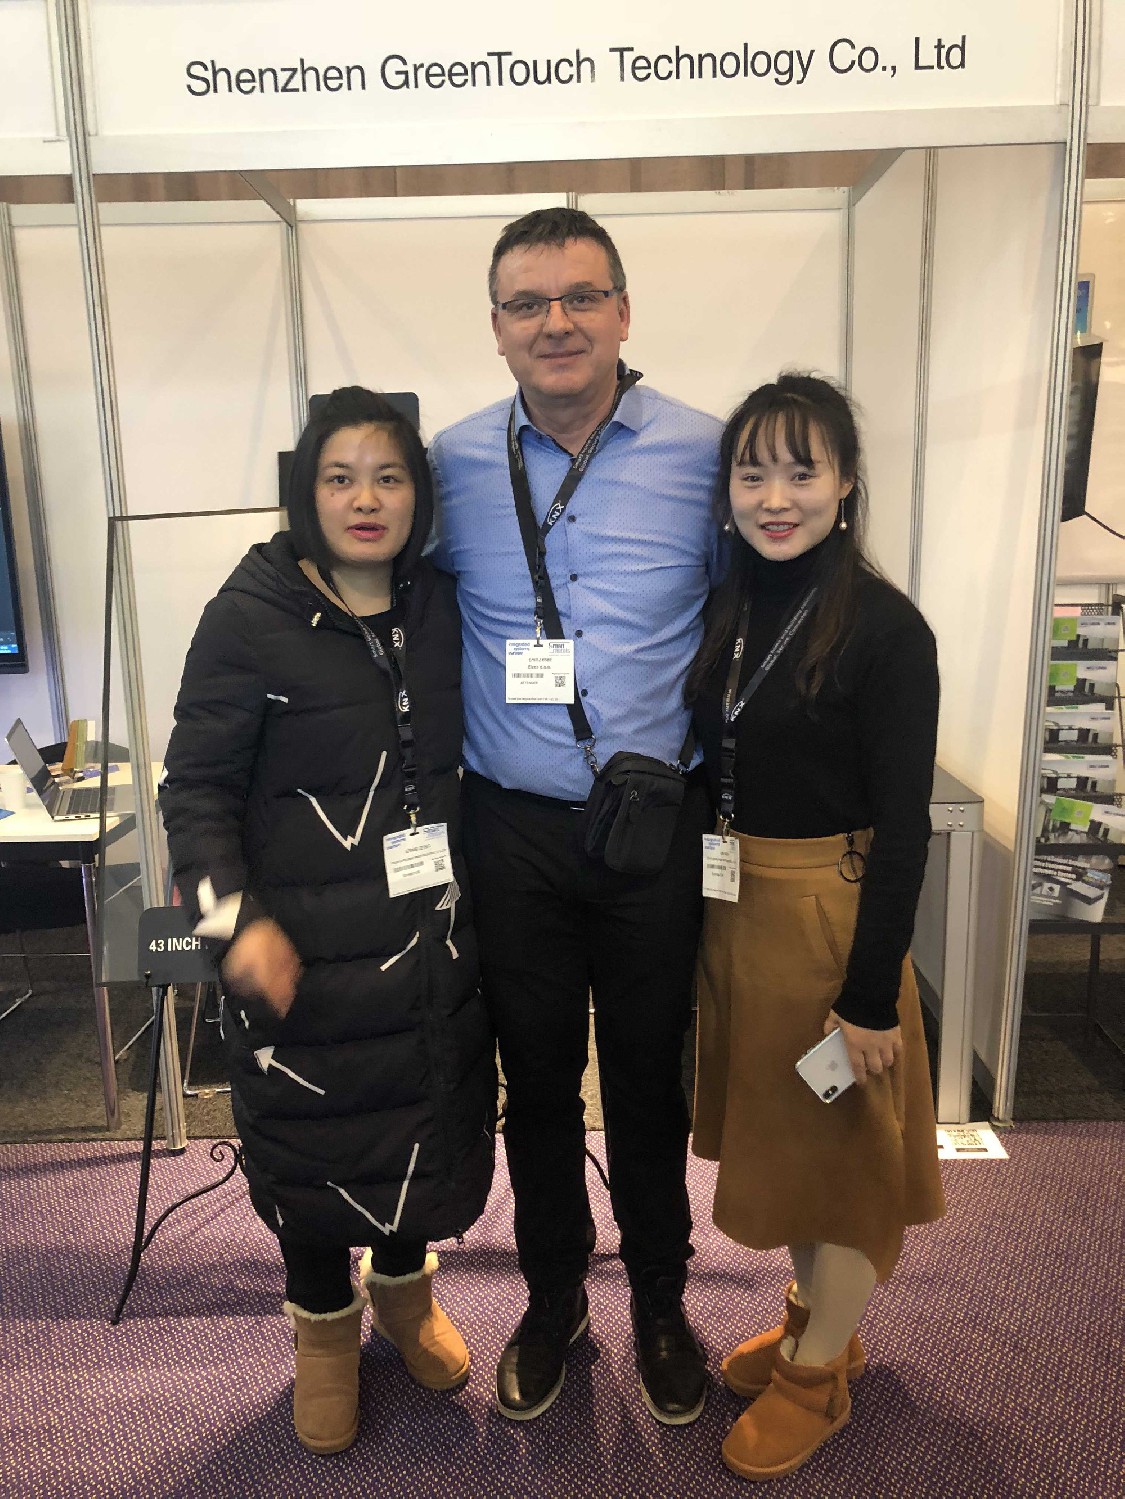 In February 2020, the company sent Zeng Ermei and Wenqin to the Dutch exhibition